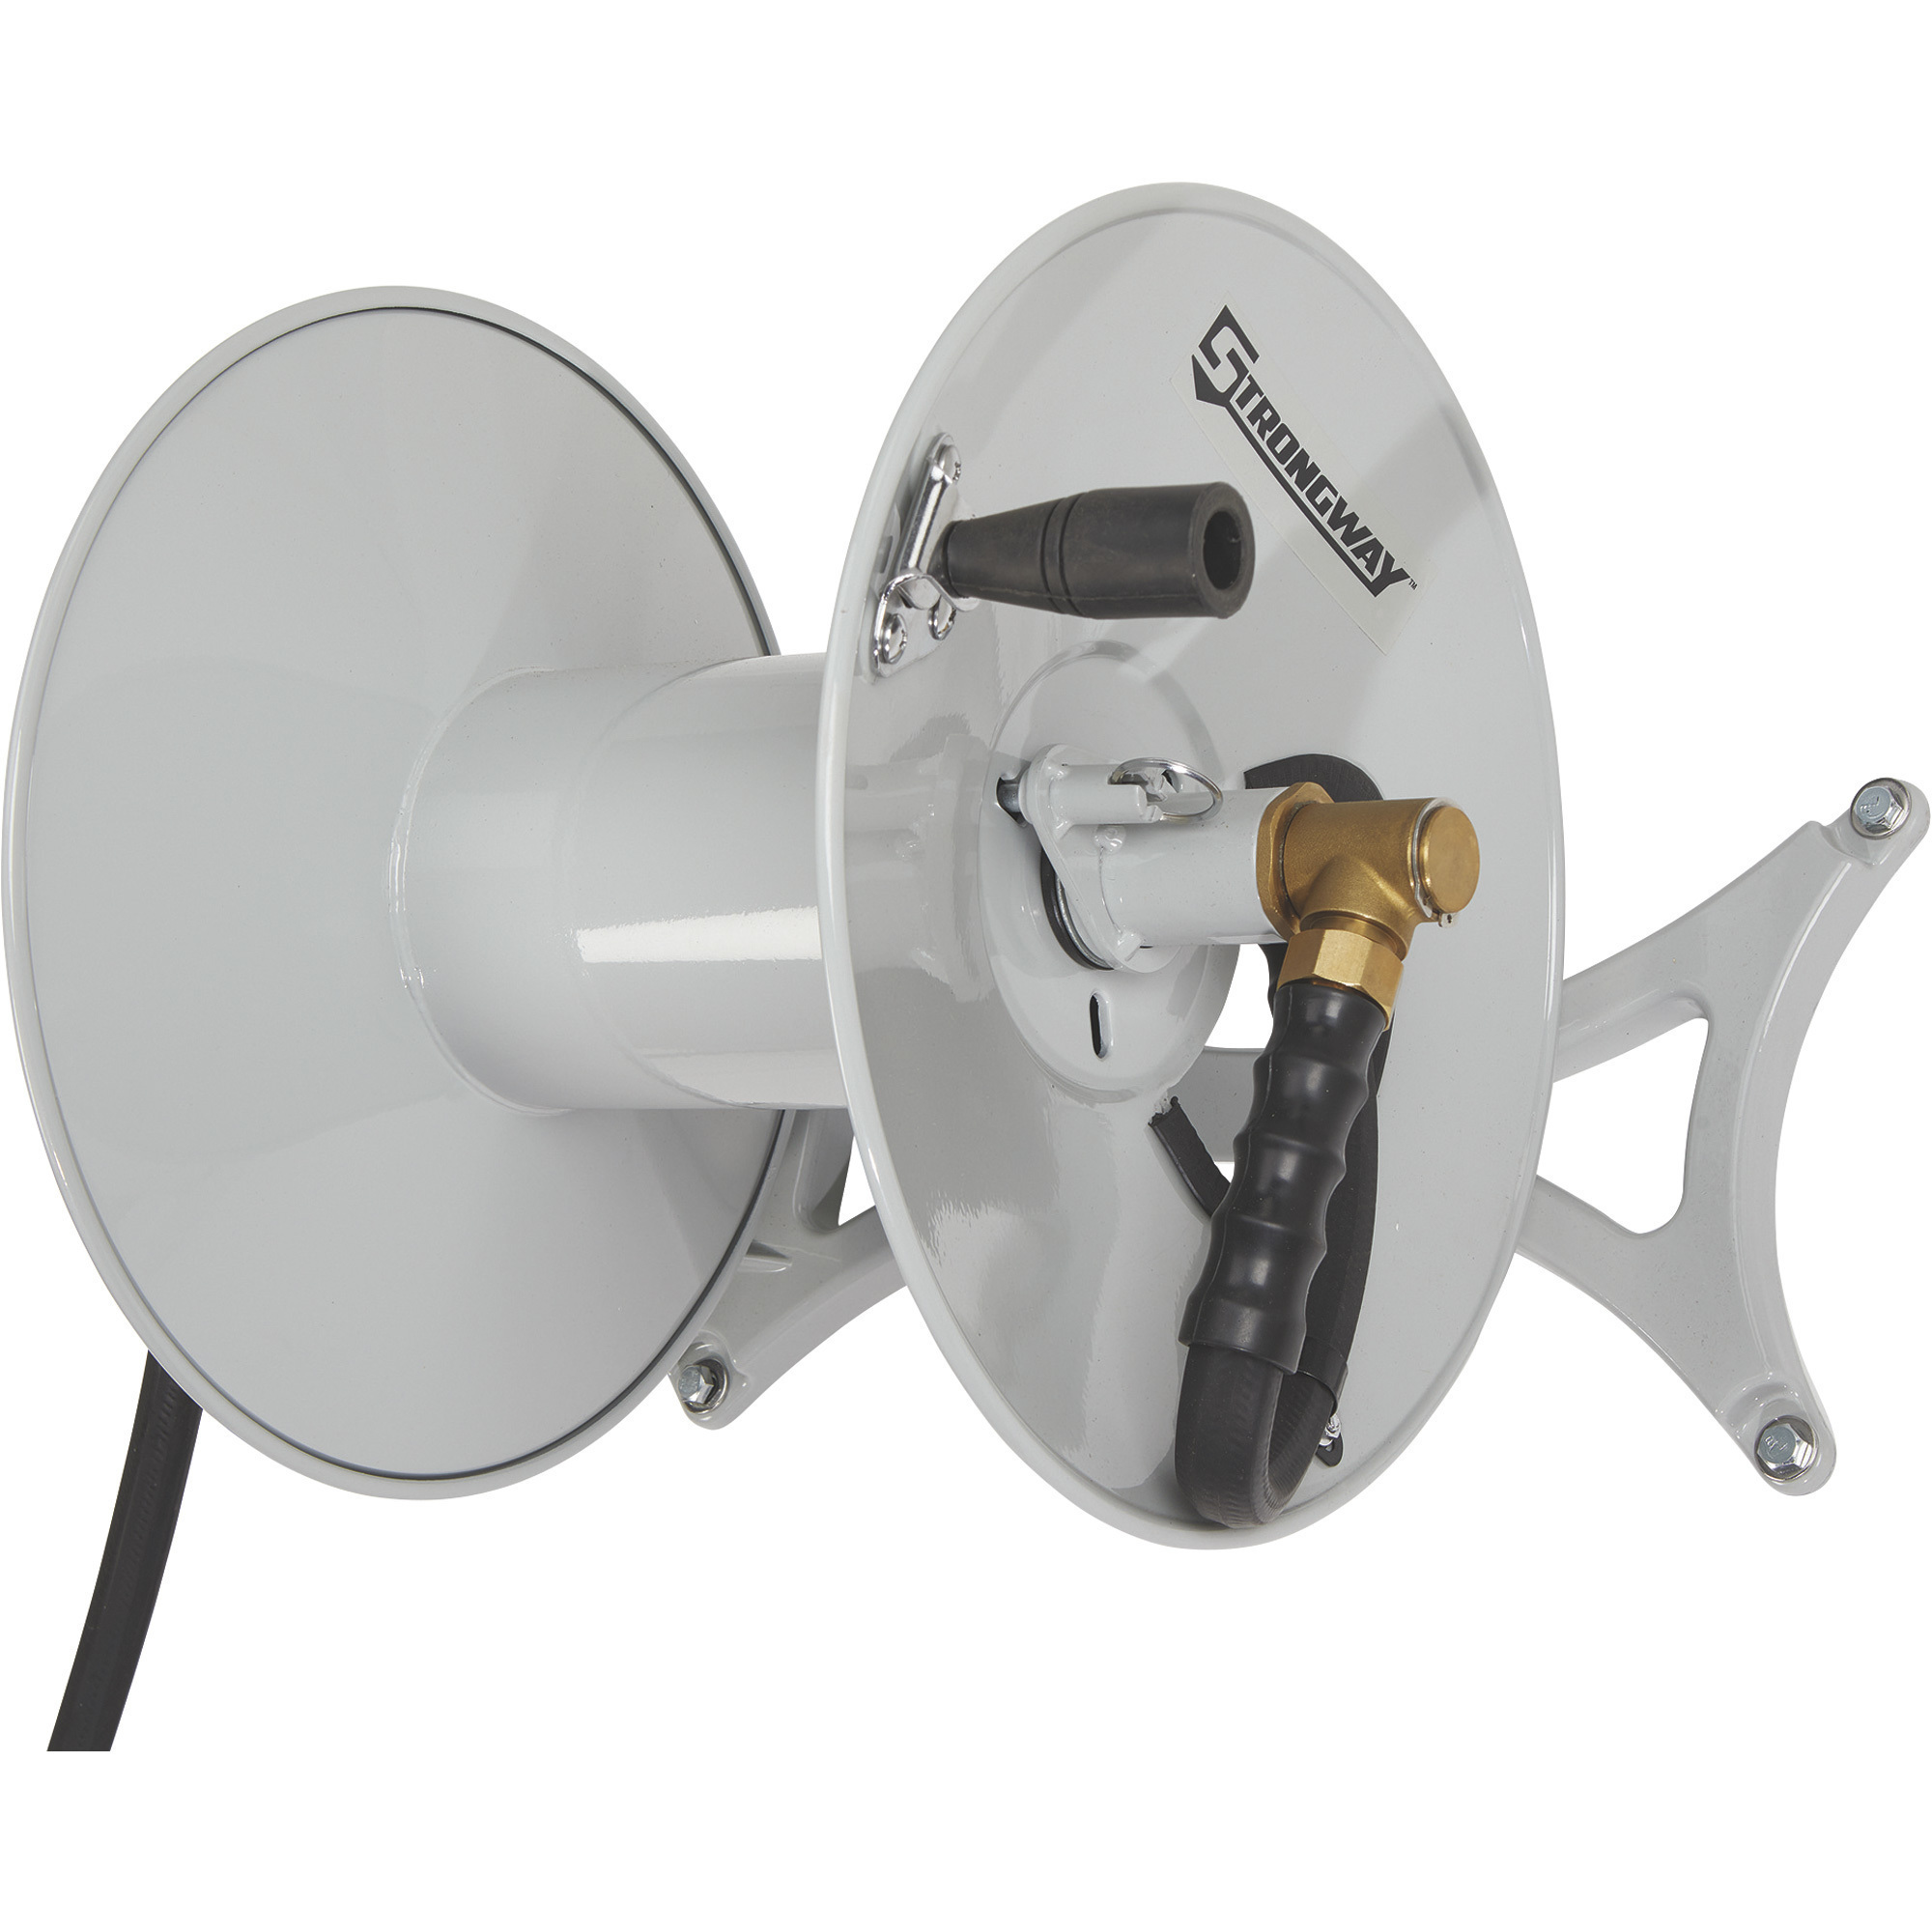 Strongway Wall-Mount Hose Reel with 6ft. Lead-In Hose, Holds 5/8in. x  150ft. Hose